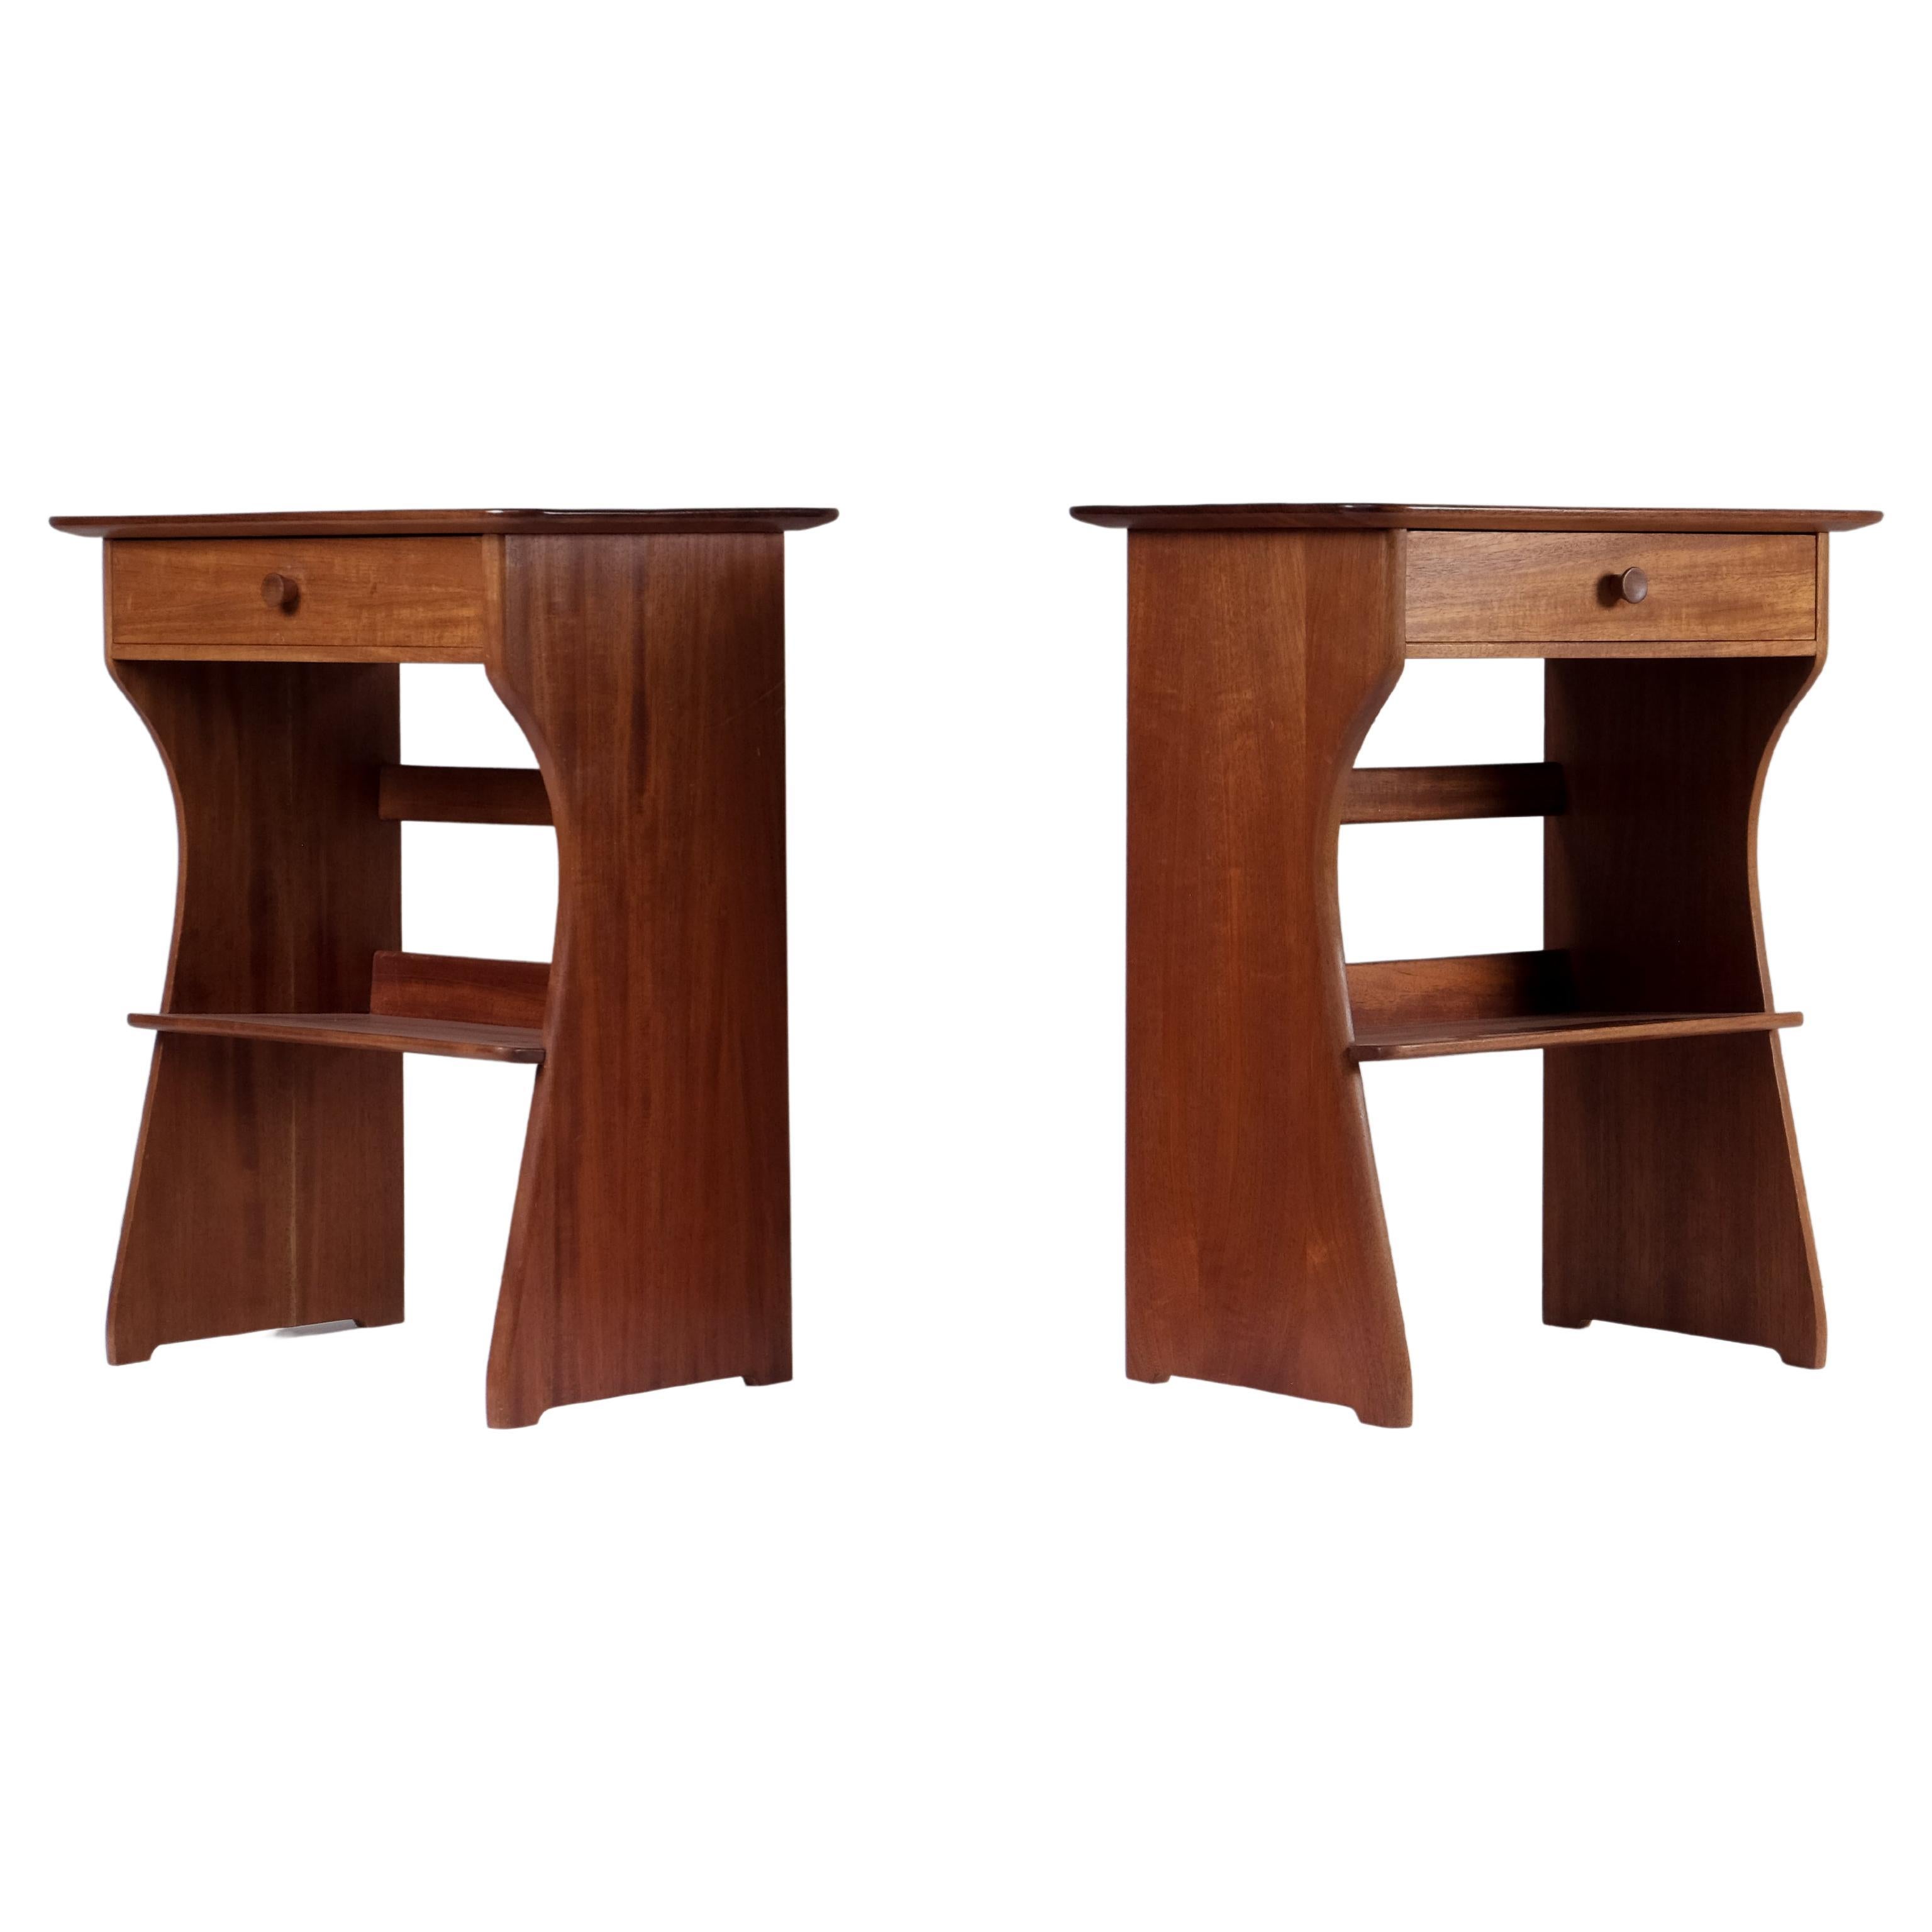 Pair of elegant bedside tables in pine, designed by Carl Malmsten, Sweden, 1950s. 
Excellent condition with small signs of usage and patina.